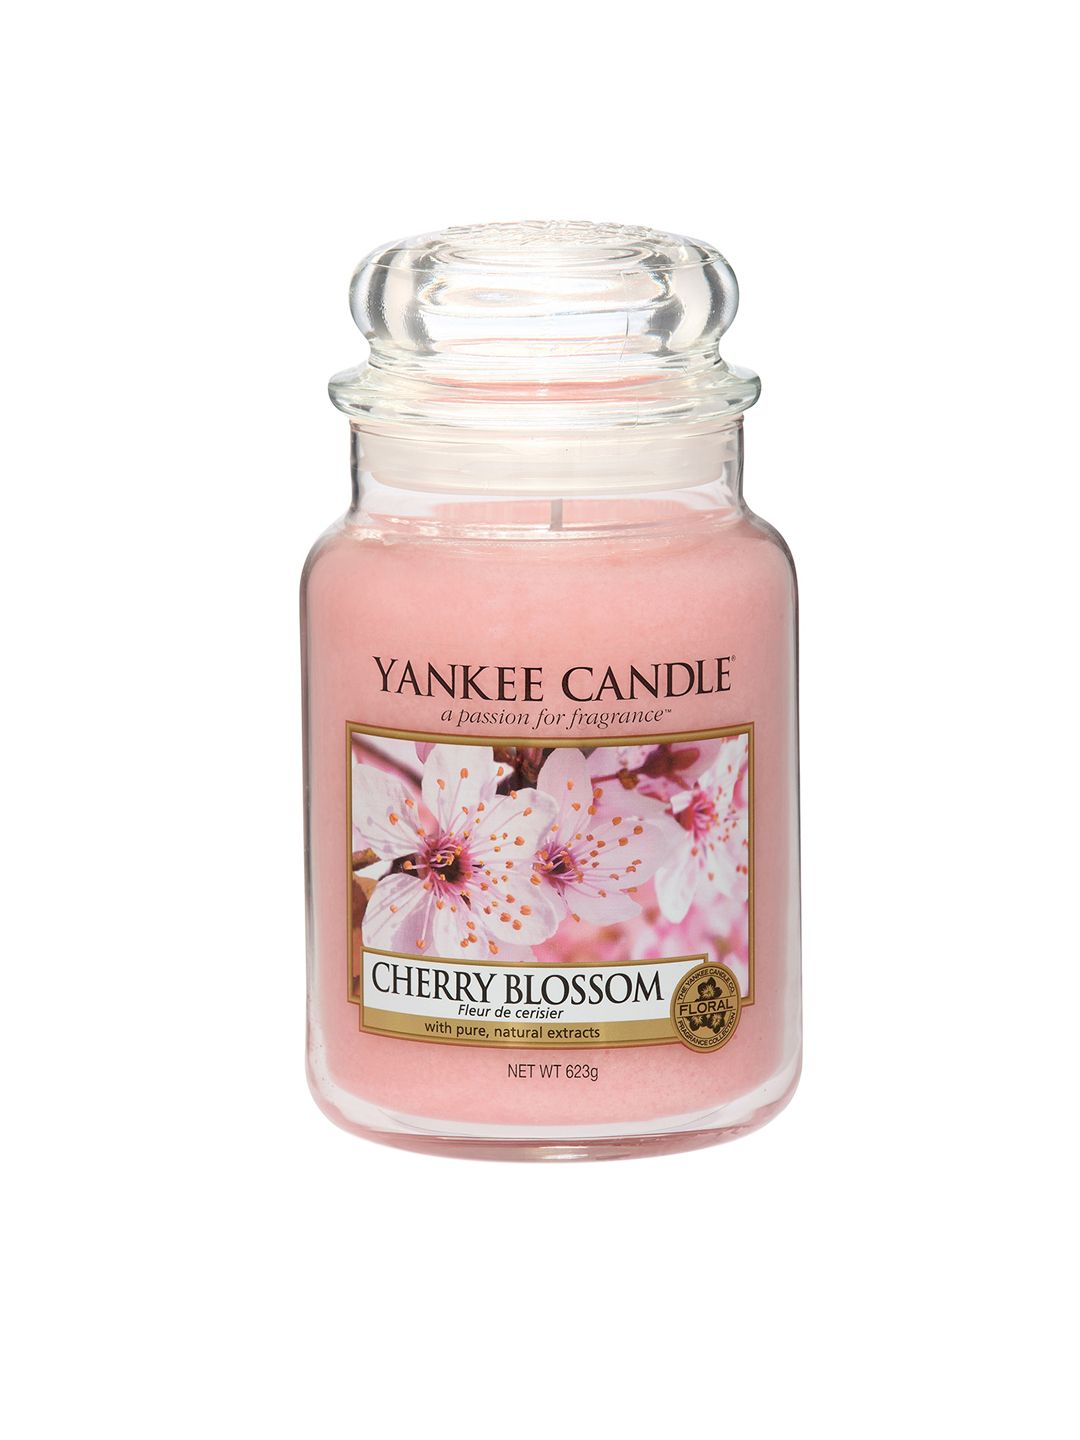 YANKEE CANDLE Pink Yankee Candle Classic Large Jar Cherry Blossom Scented Candles Price in India